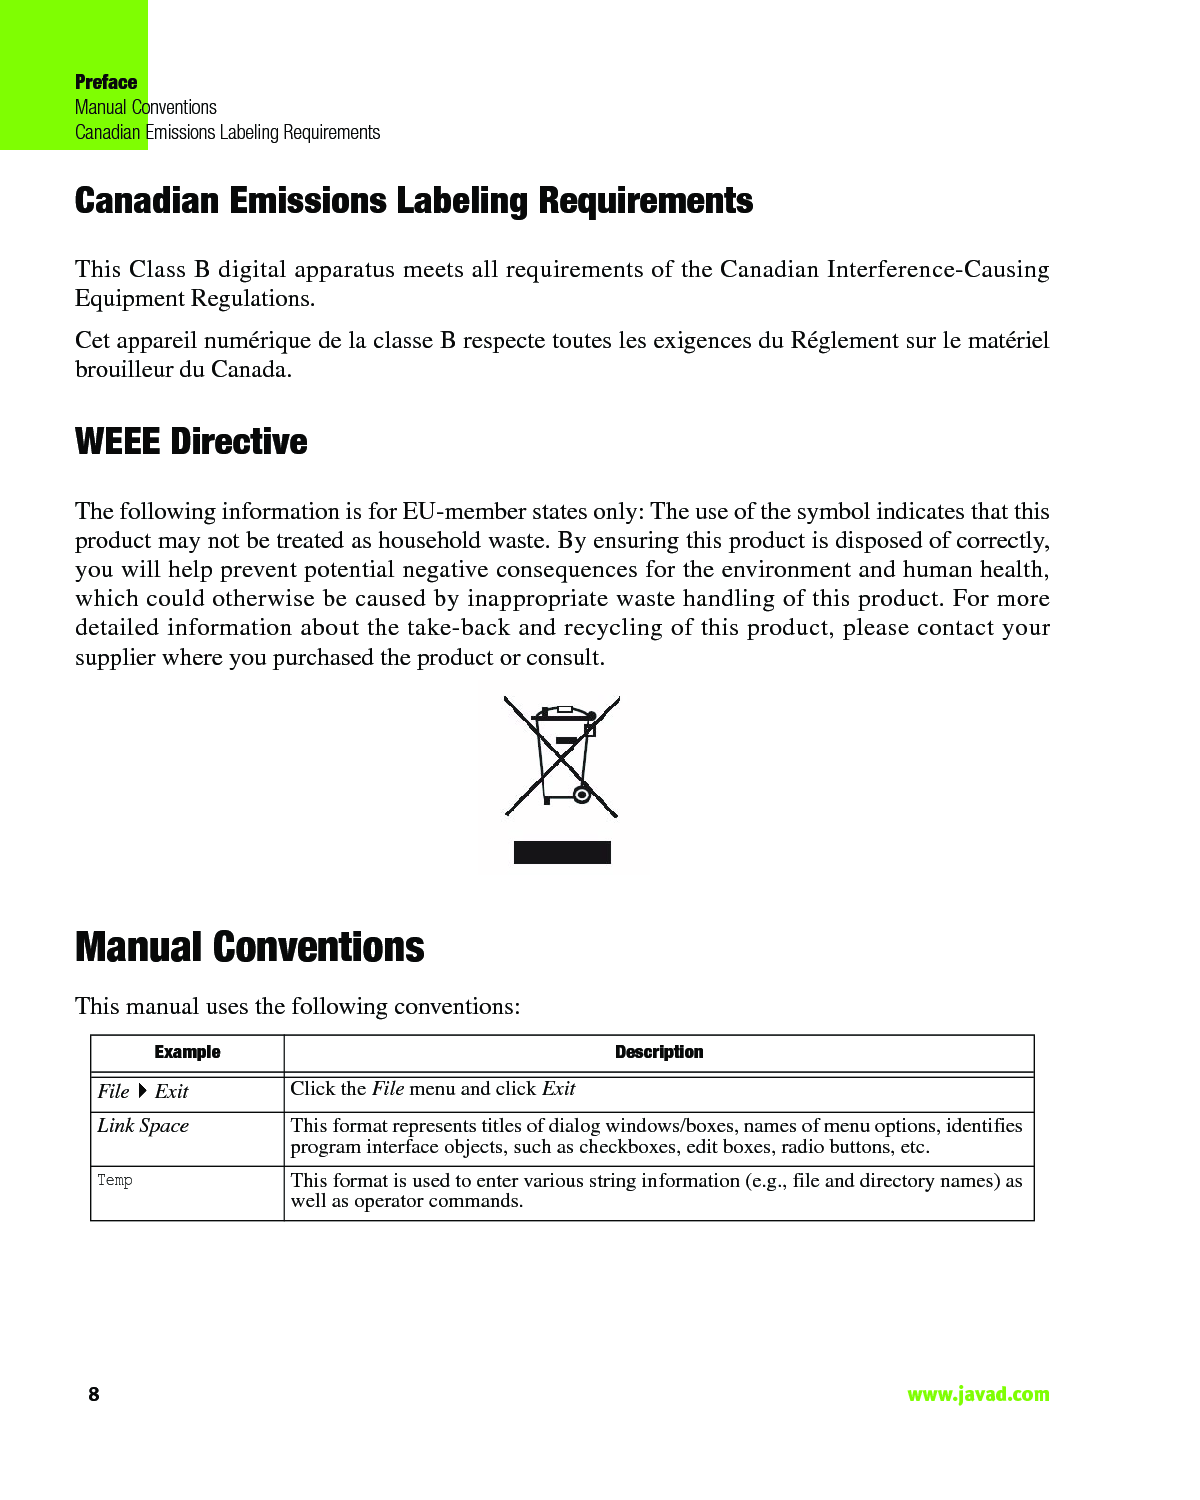 PrefaceManual ConventionsCanadian Emissions Labeling Requirements8                                                                                                                    www.javad.comCanadian Emissions Labeling RequirementsThis Class B digital apparatus meets all requirements of the Canadian Interference-CausingEquipment Regulations.Cet appareil numérique de la classe B respecte toutes les exigences du Réglement sur le matérielbrouilleur du Canada.WEEE DirectiveThe following information is for EU-member states only: The use of the symbol indicates that thisproduct may not be treated as household waste. By ensuring this product is disposed of correctly,you will help prevent potential negative consequences for the environment and human health,which could otherwise be caused by inappropriate waste handling of this product. For moredetailed information about the take-back and recycling of this product, please contact yoursupplier where you purchased the product or consult. Manual ConventionsThis manual uses the following conventions:Example DescriptionFileExit Click the File menu and click ExitLink Space This format represents titles of dialog windows/boxes, names of menu options, identifies program interface objects, such as checkboxes, edit boxes, radio buttons, etc.TempThis format is used to enter various string information (e.g., file and directory names) as well as operator commands.